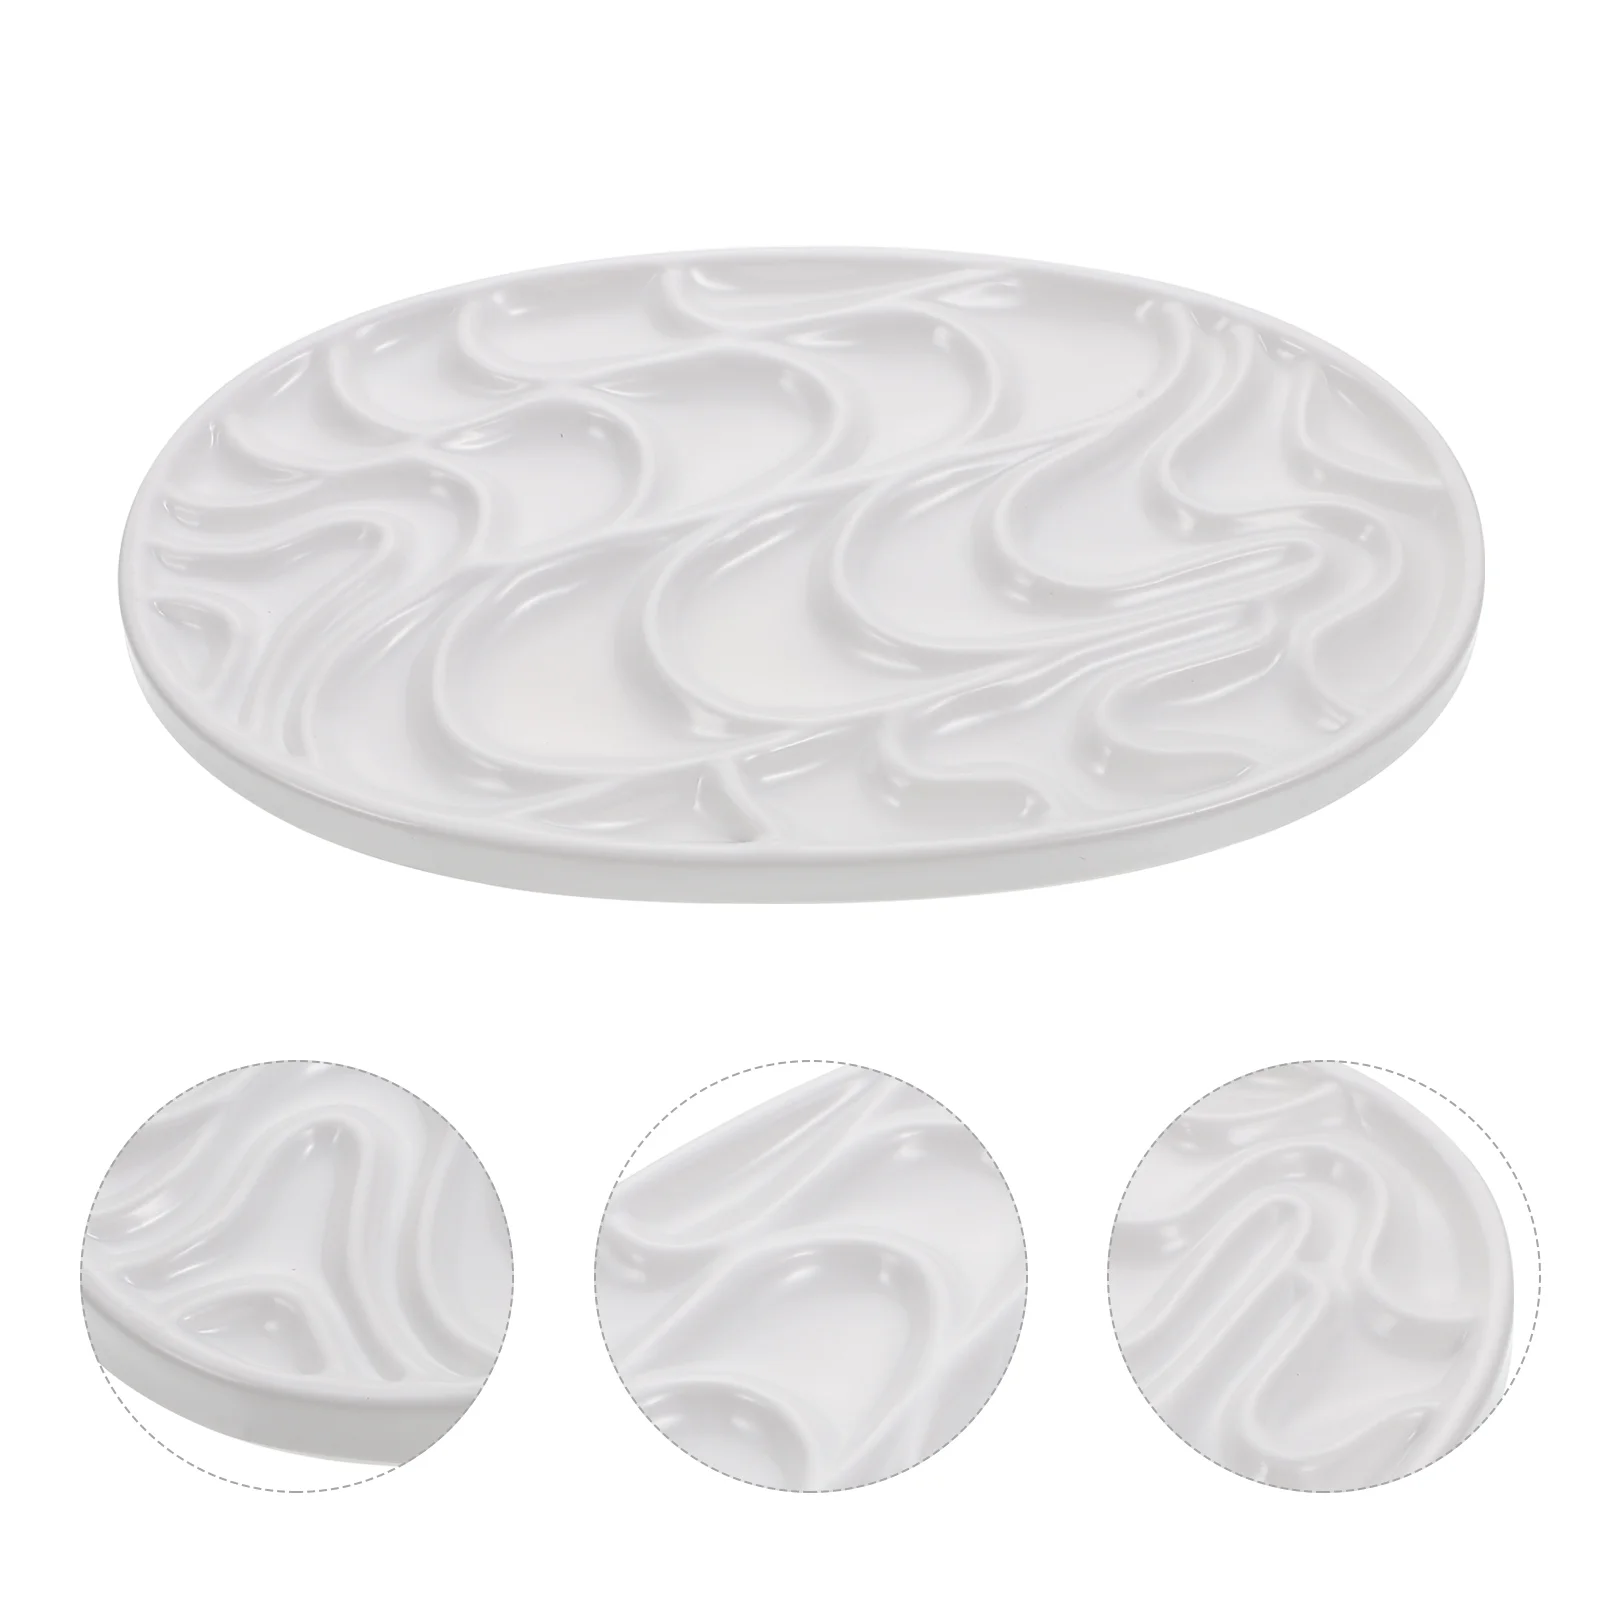 Wave Palette Paint Trays for Kids Square Pigment Mixing Plate Imitation Ceramic